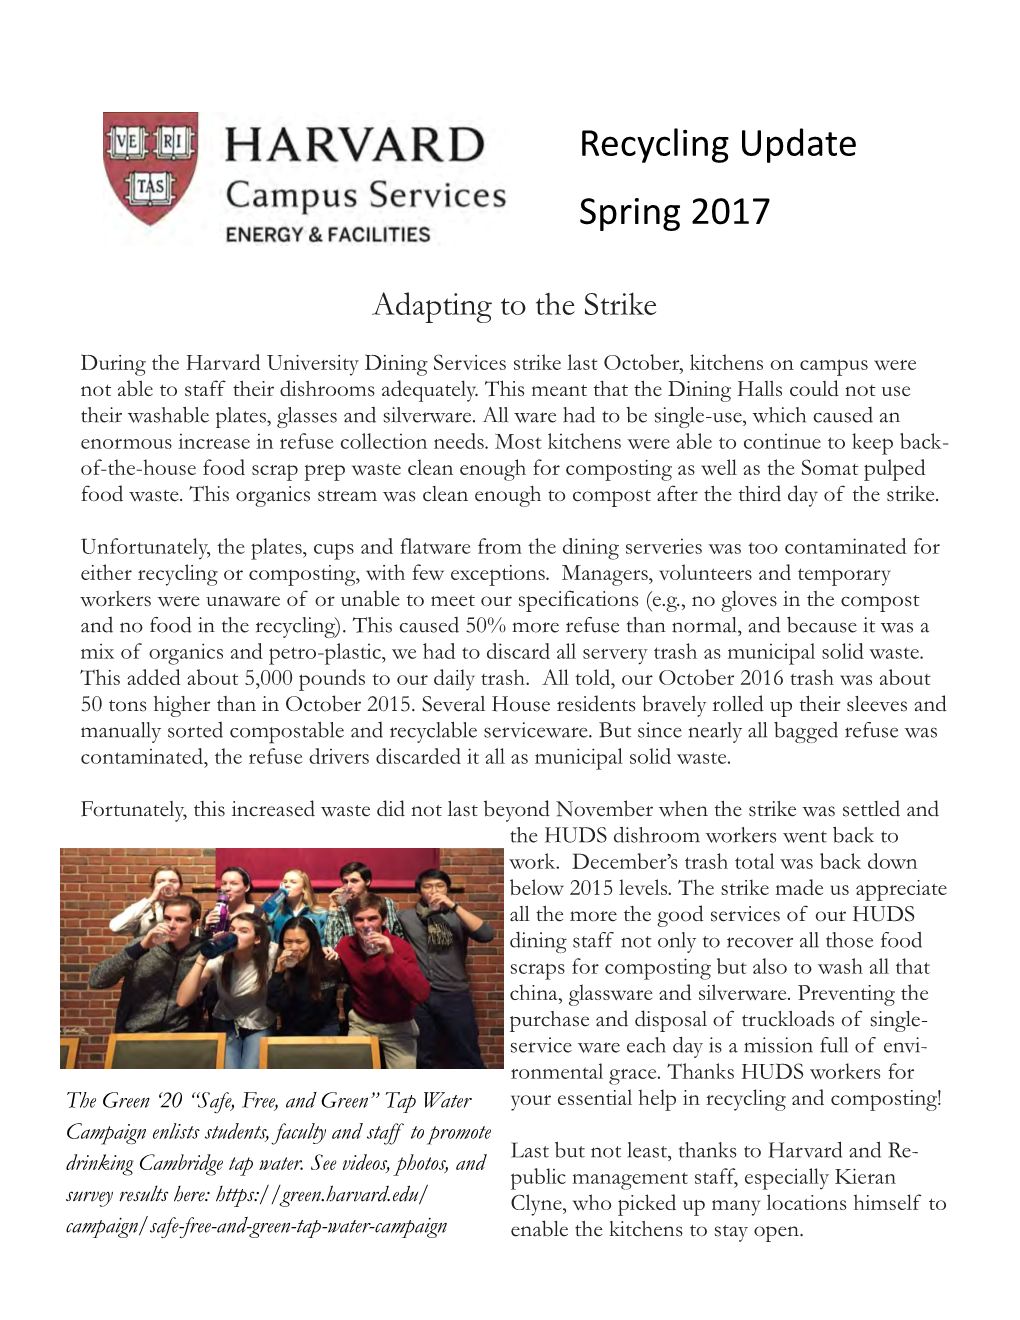 Recycling Update Spring 2017